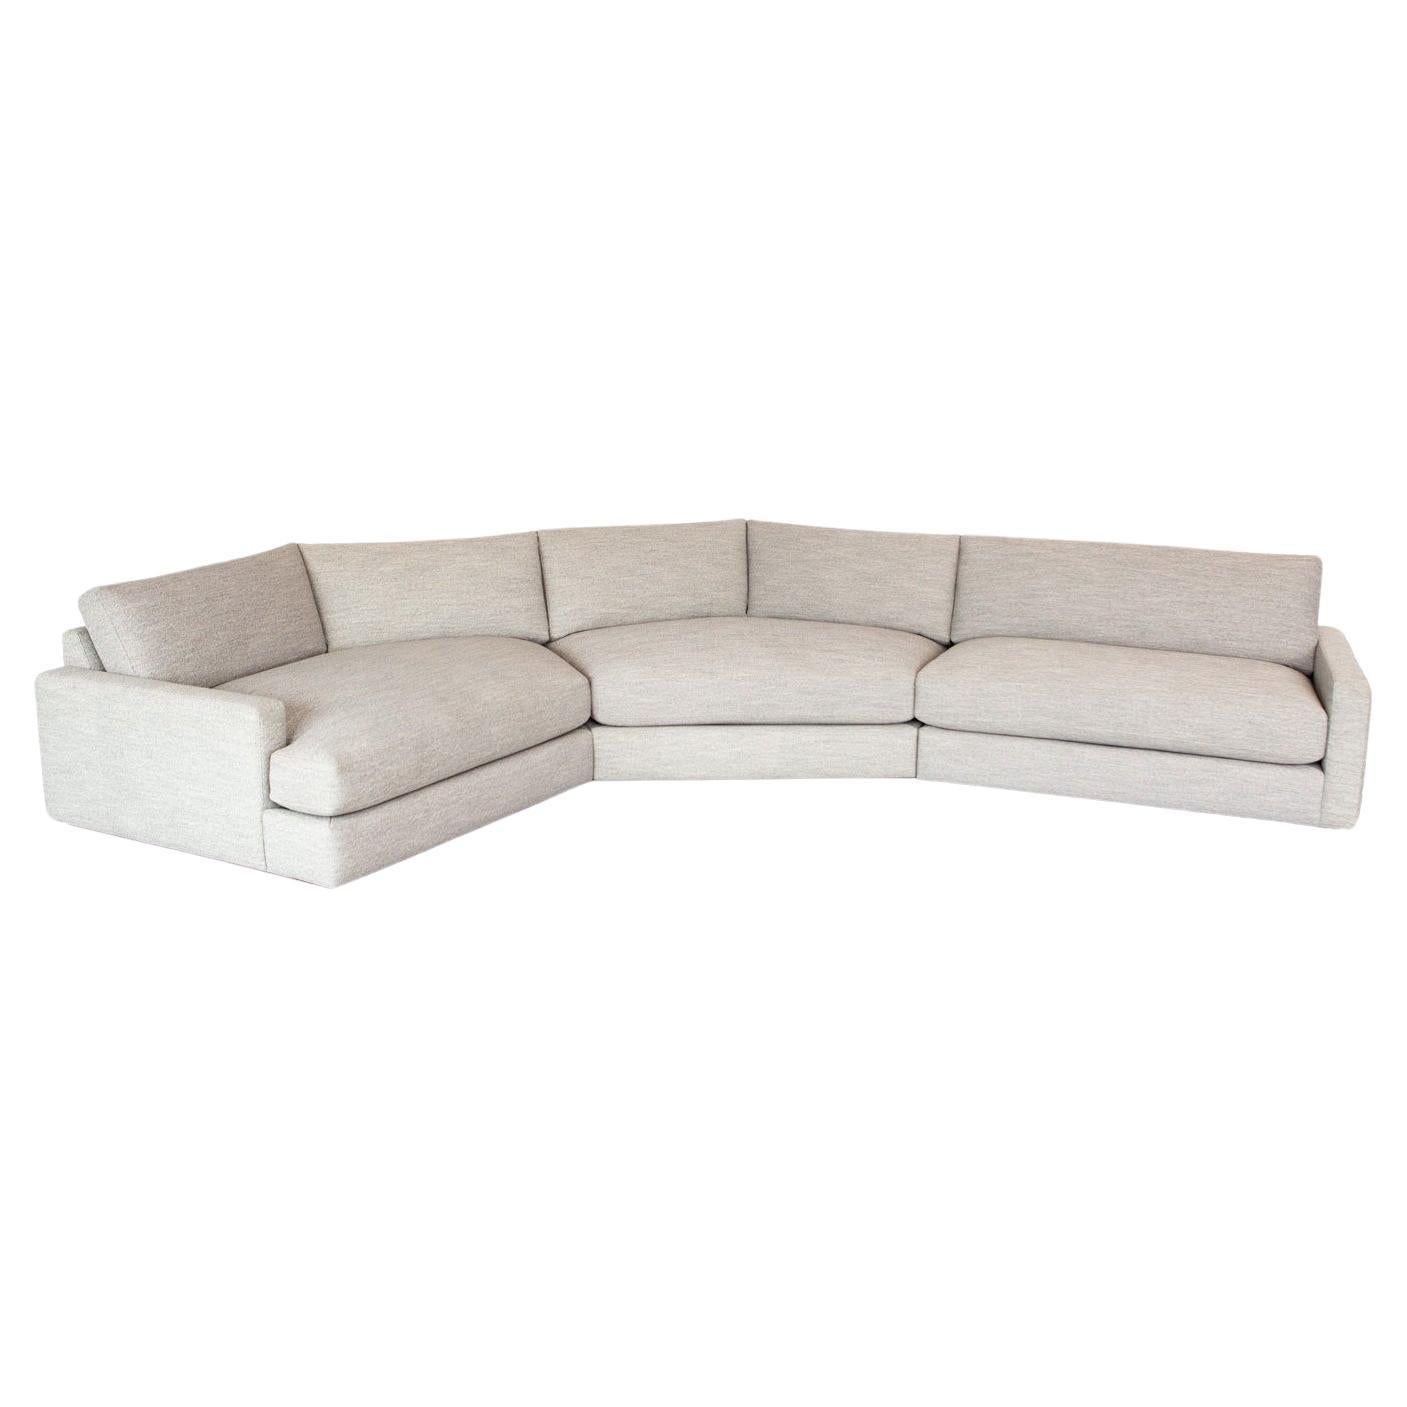 Coasty Sectional - West Coast Angled Sectional - Feather Wrap Foam Core  For Sale